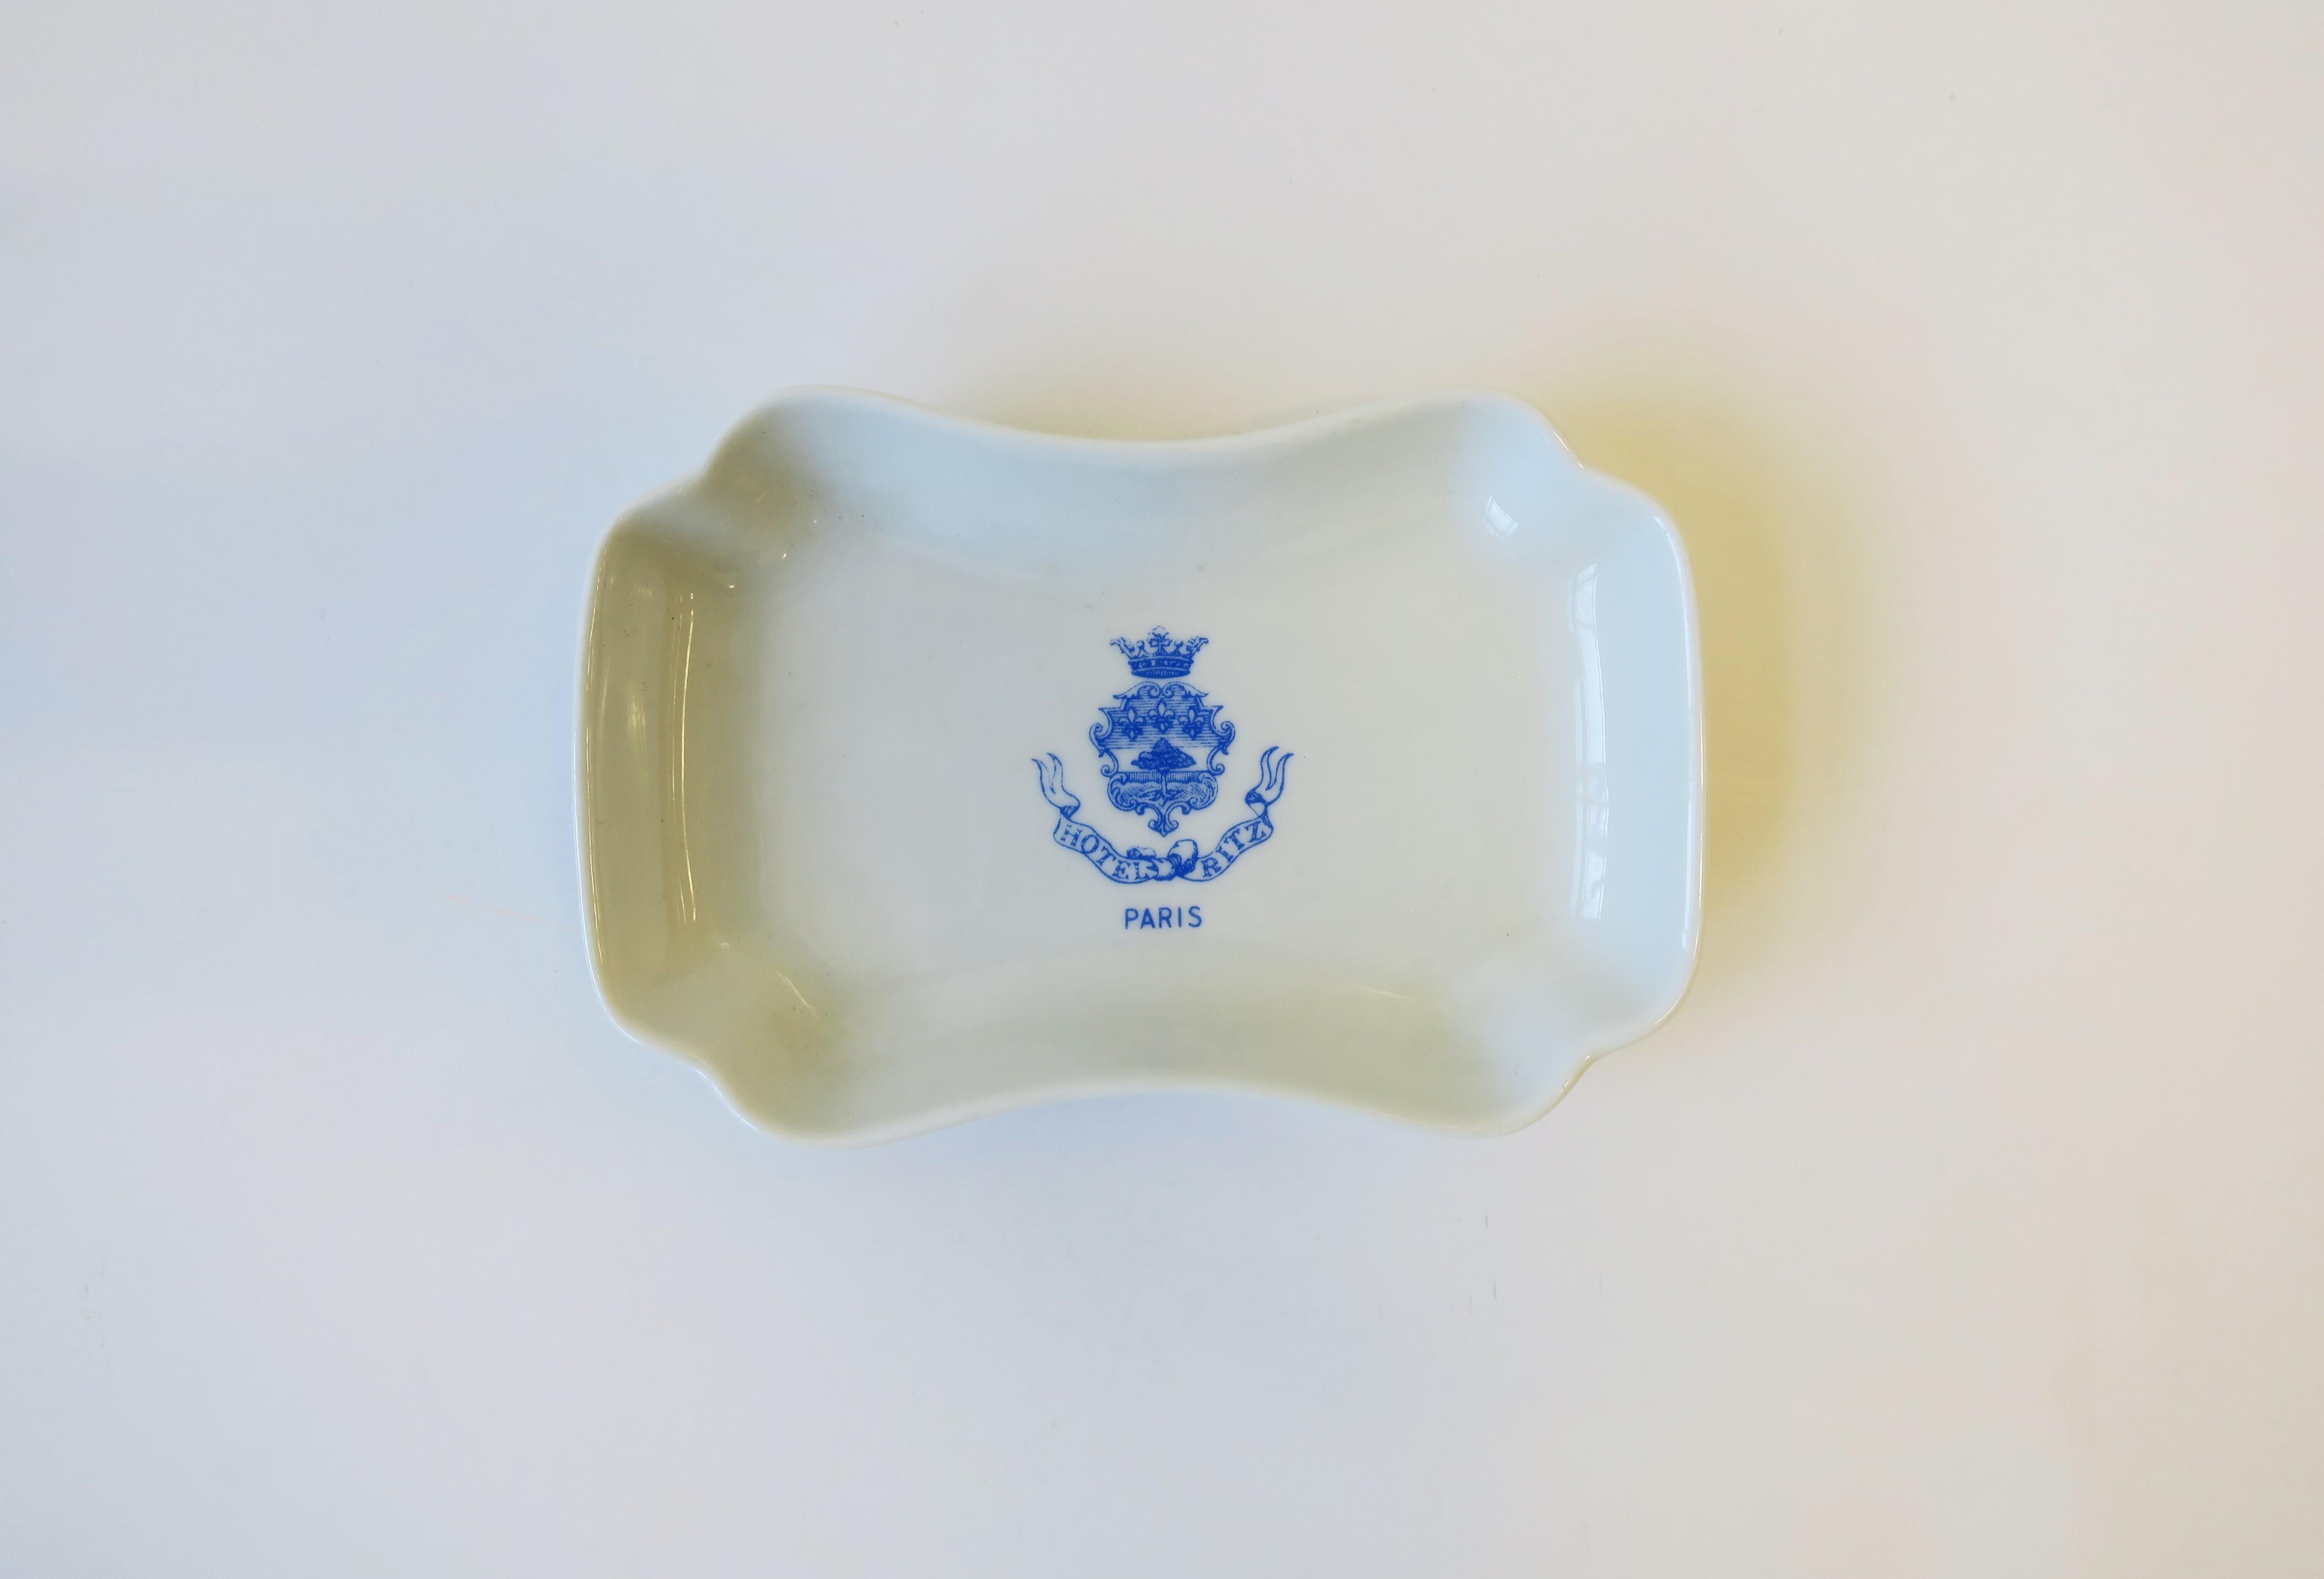 A small rectangular vintage French white and blue porcelain jewelry dish vide-poche from the Hotel Ritz, Paris. With maker's mark on bottom as shown in images #9 and 10. Made in France. A great piece for any vanity, nightstand, desk, closet area,